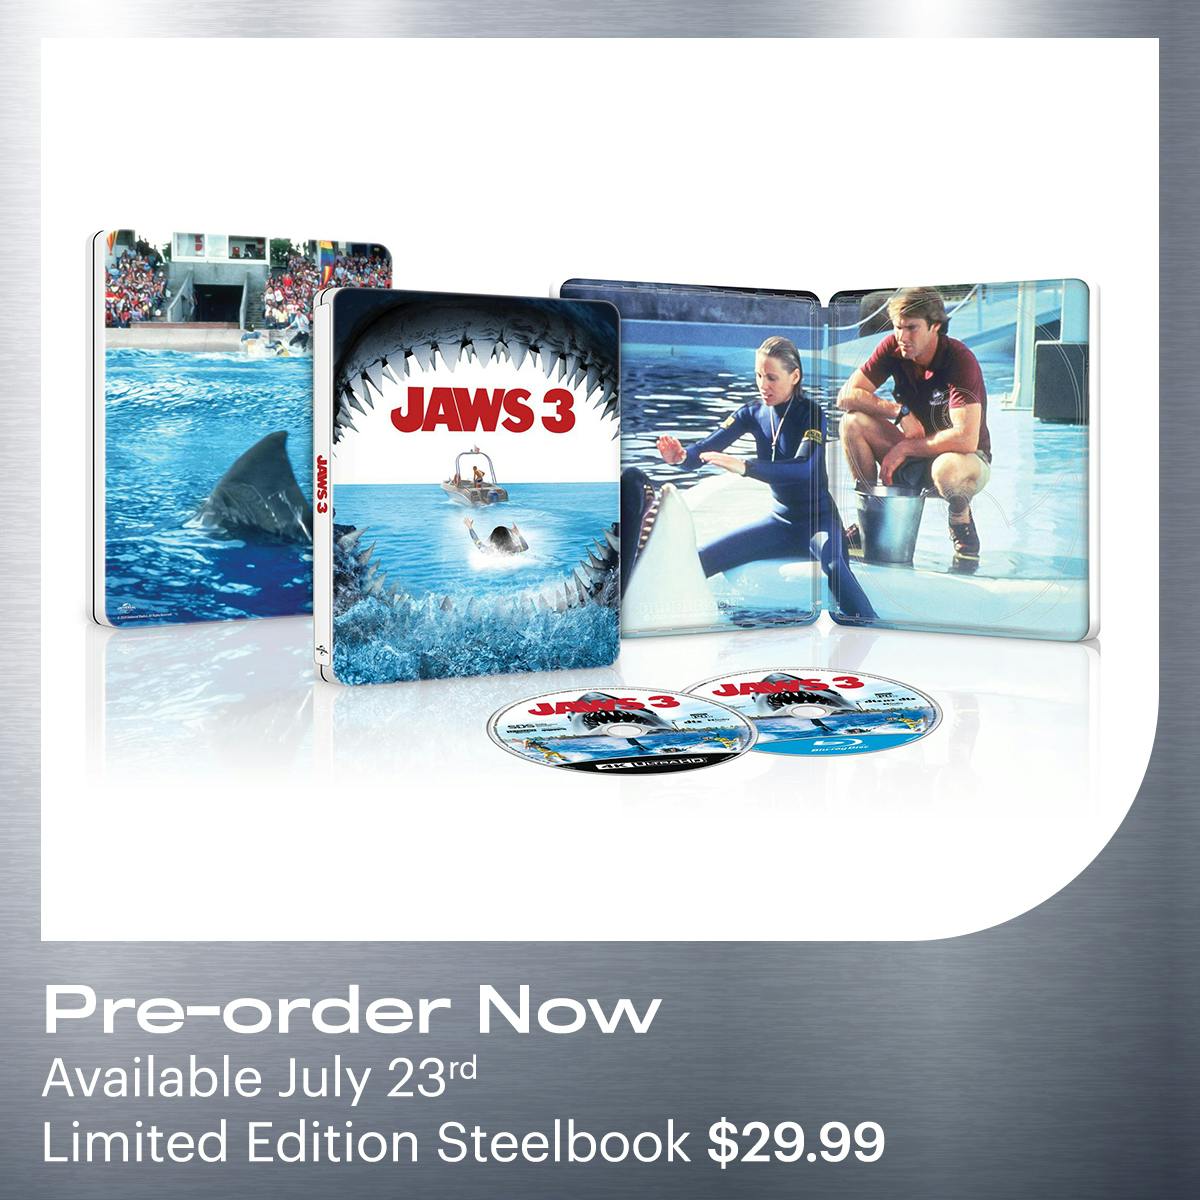 1200x1200 Jaws 3 Limited Edition Steelbook